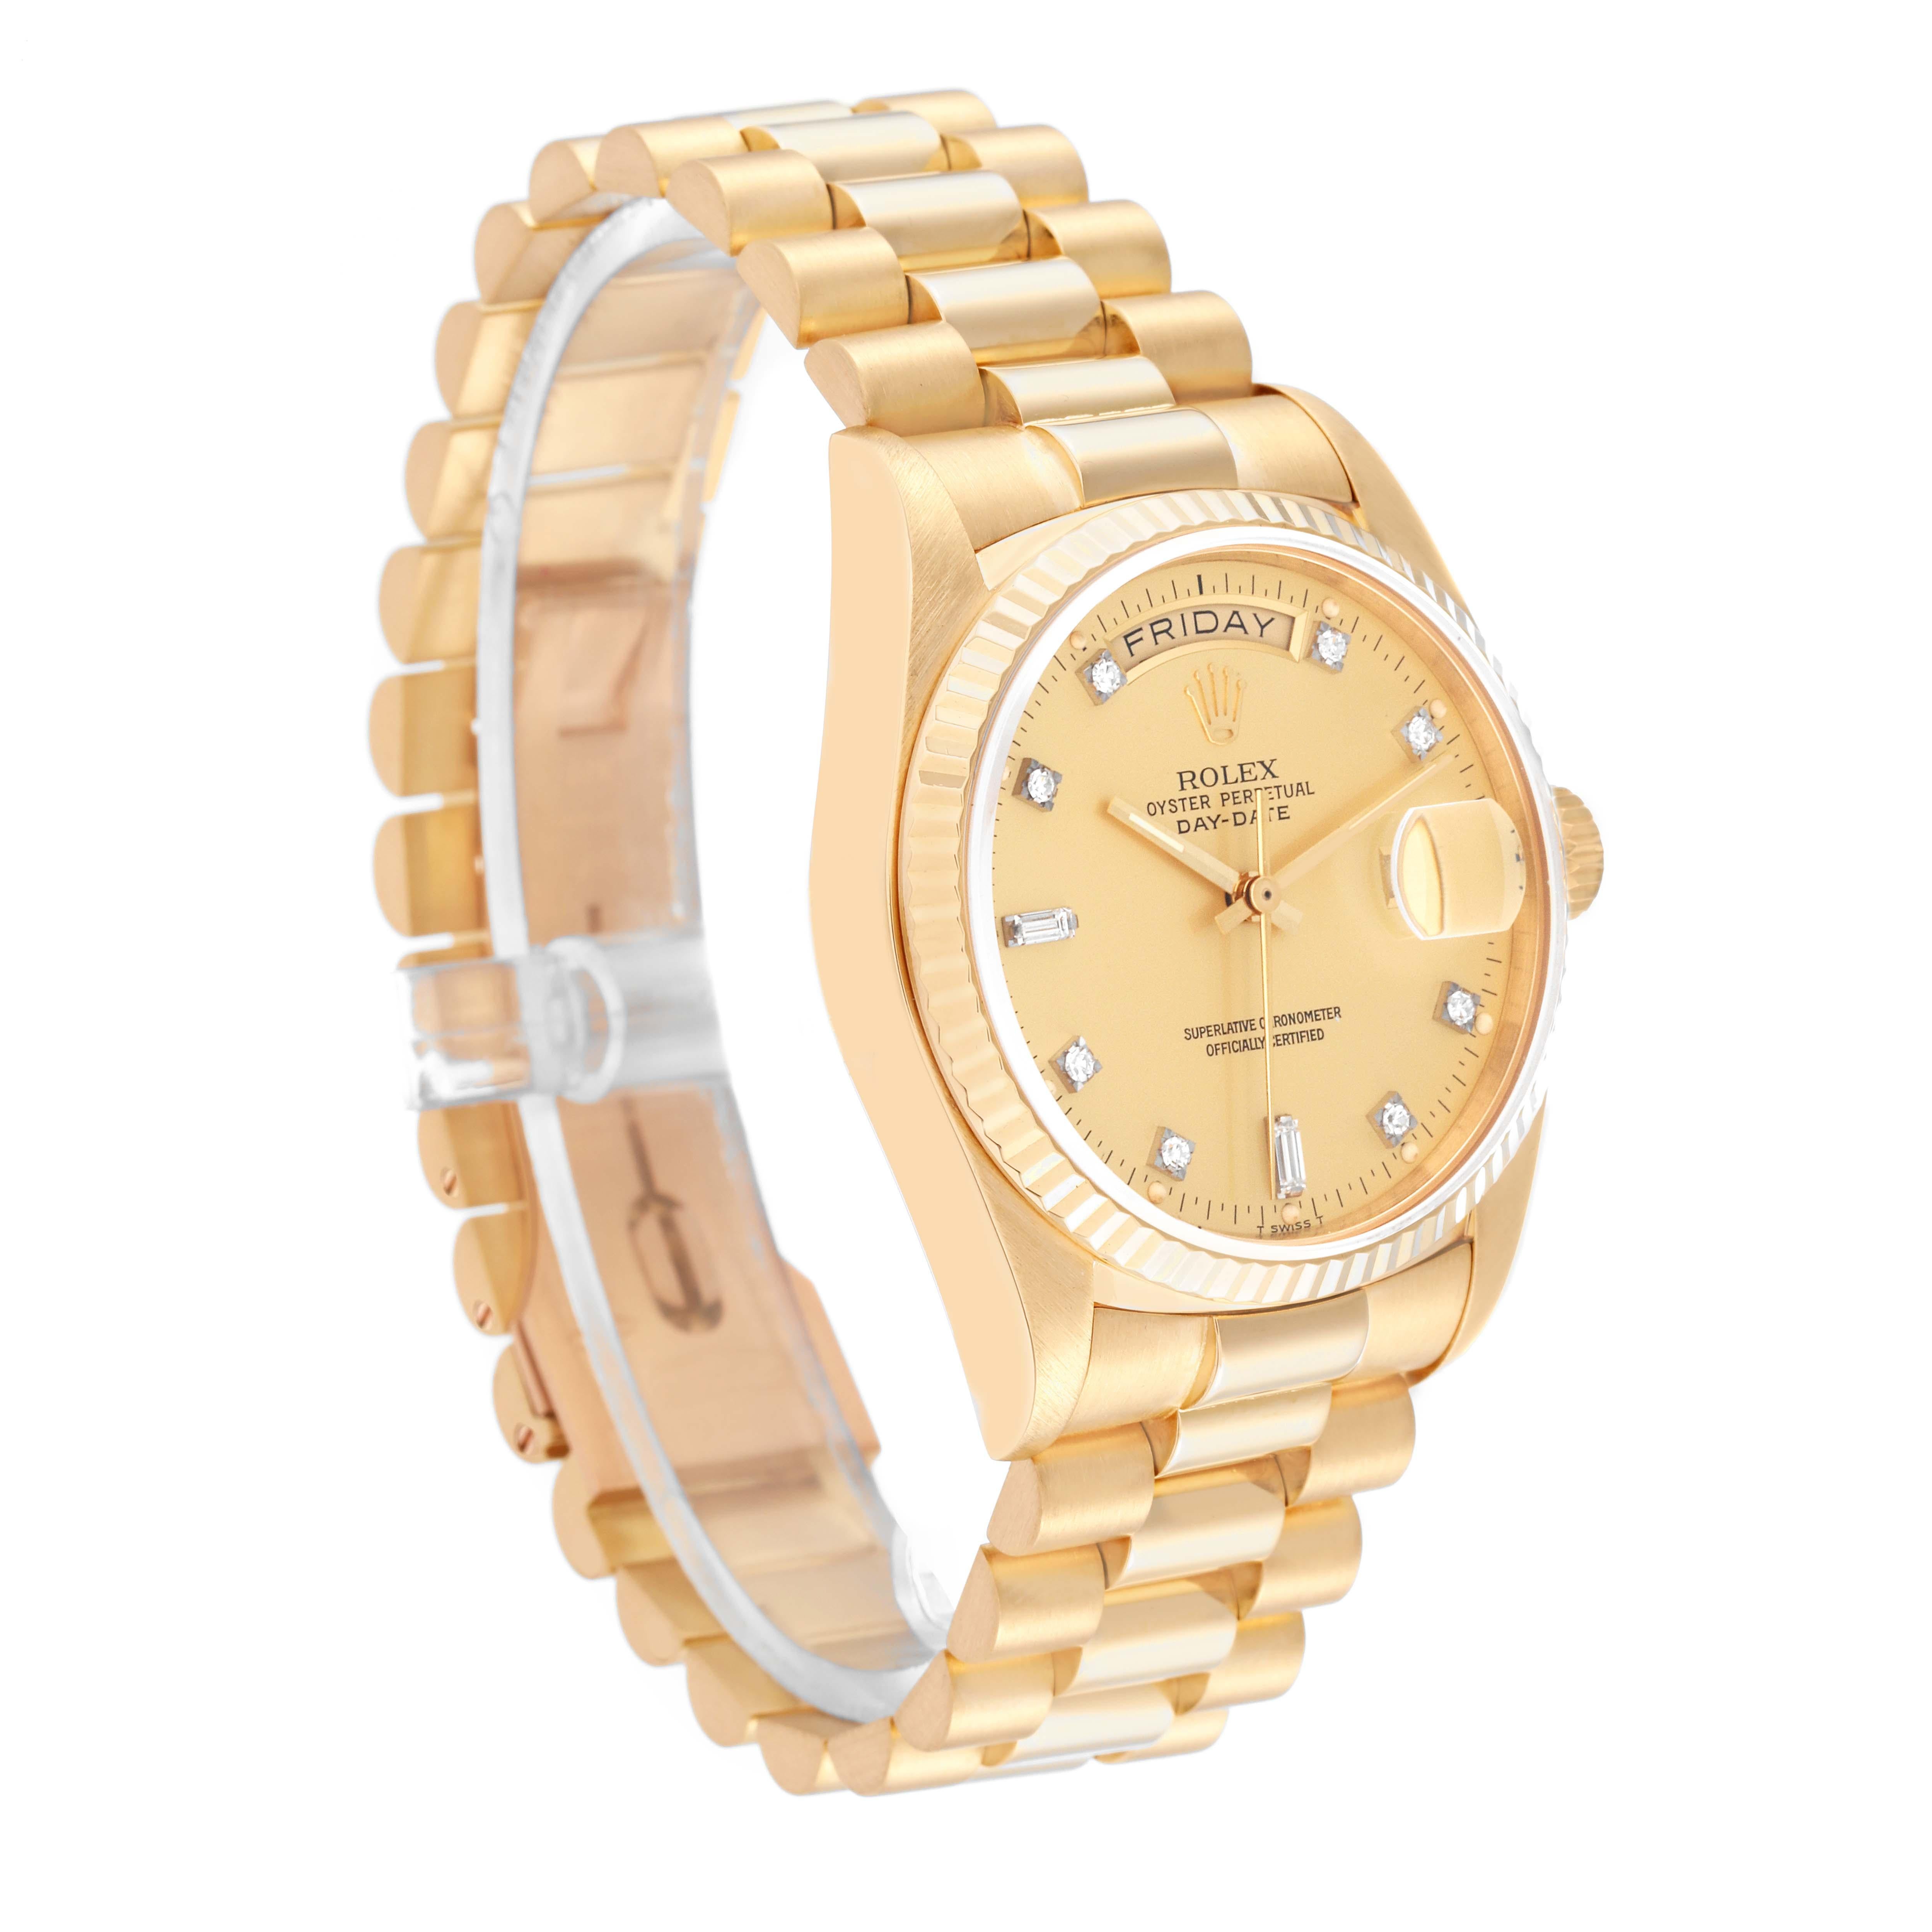 Rolex President Day-Date Yellow Gold Diamond Dial Mens Watch 18038 In Excellent Condition For Sale In Atlanta, GA